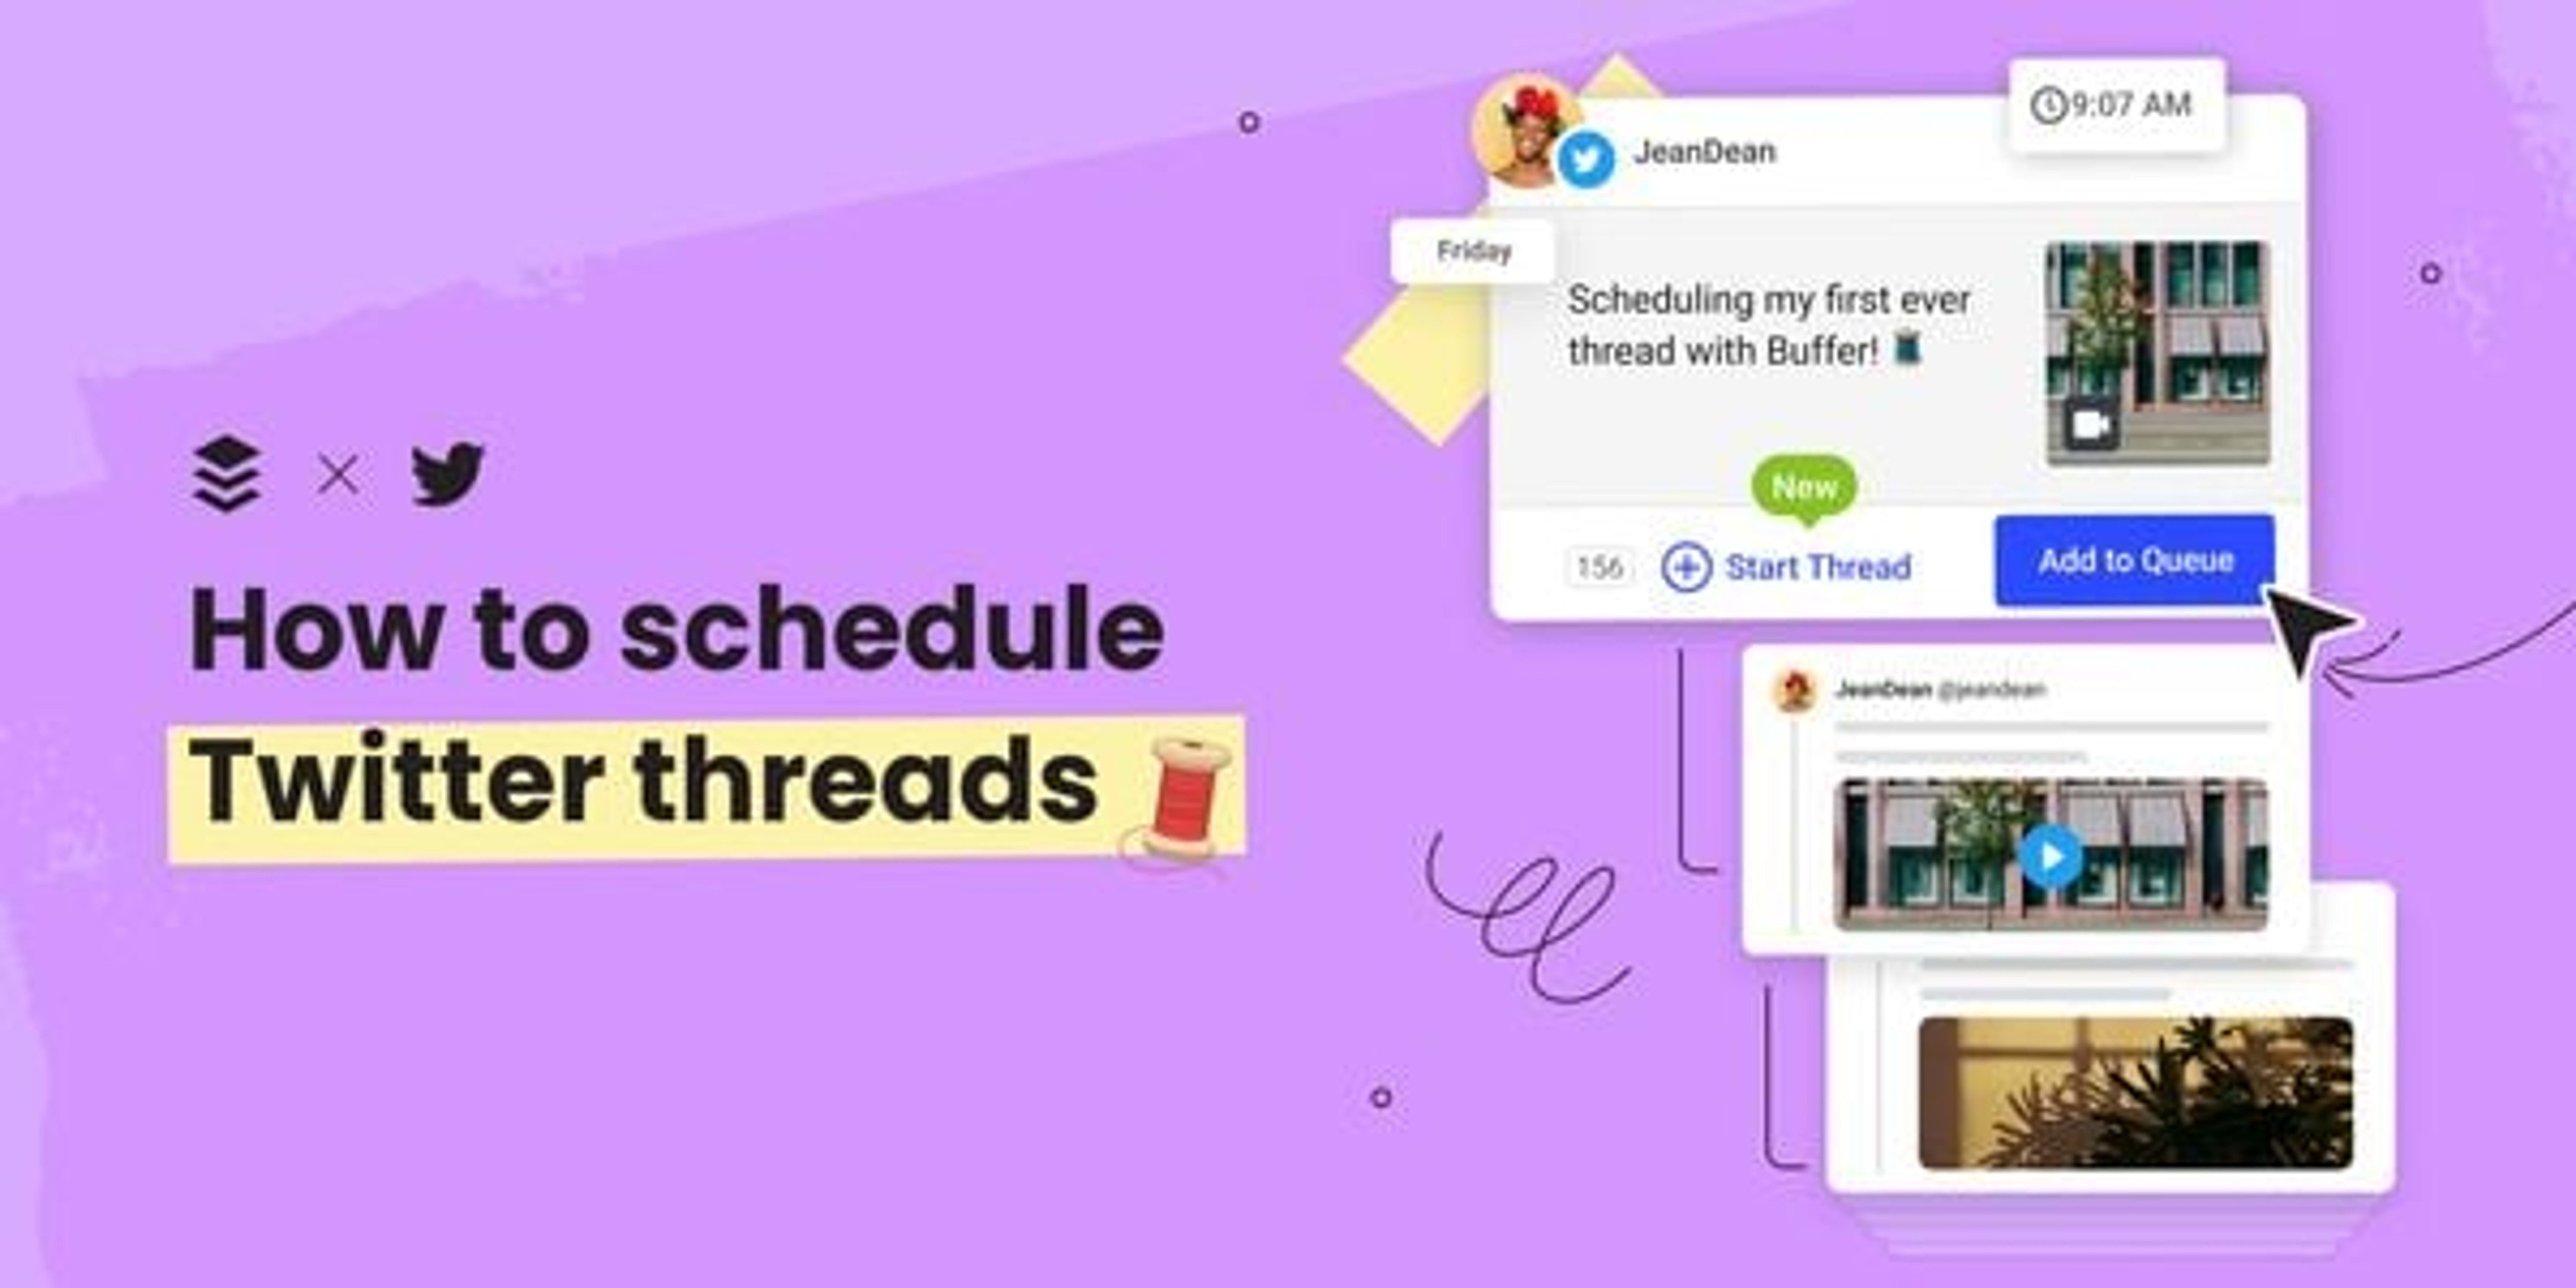 How to Schedule Twitter Threads